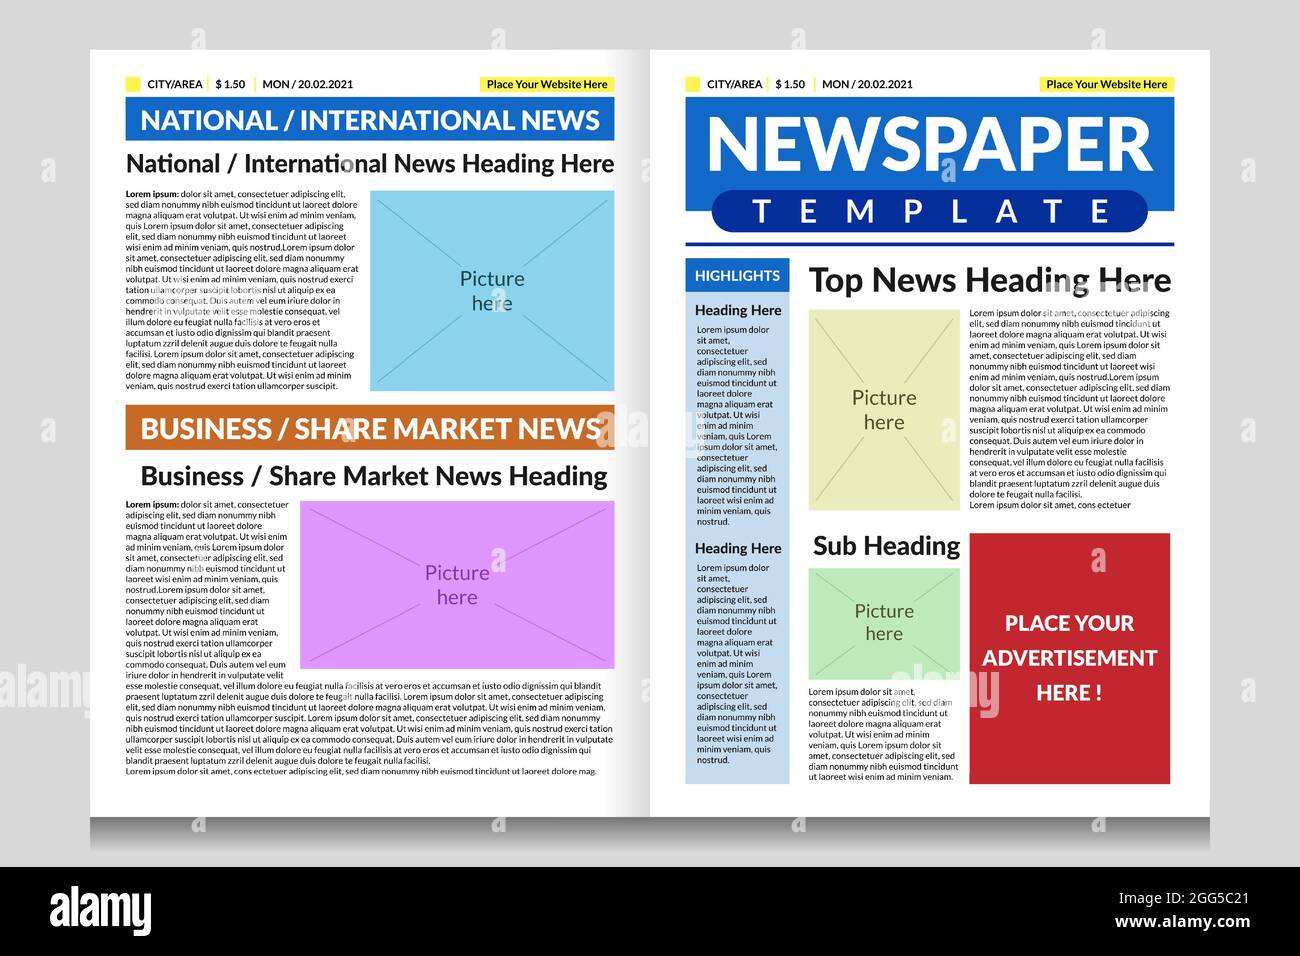 Newspaper front page design template. Newspaper sample design with heading, body text and pictures placeholder. Stock Vector